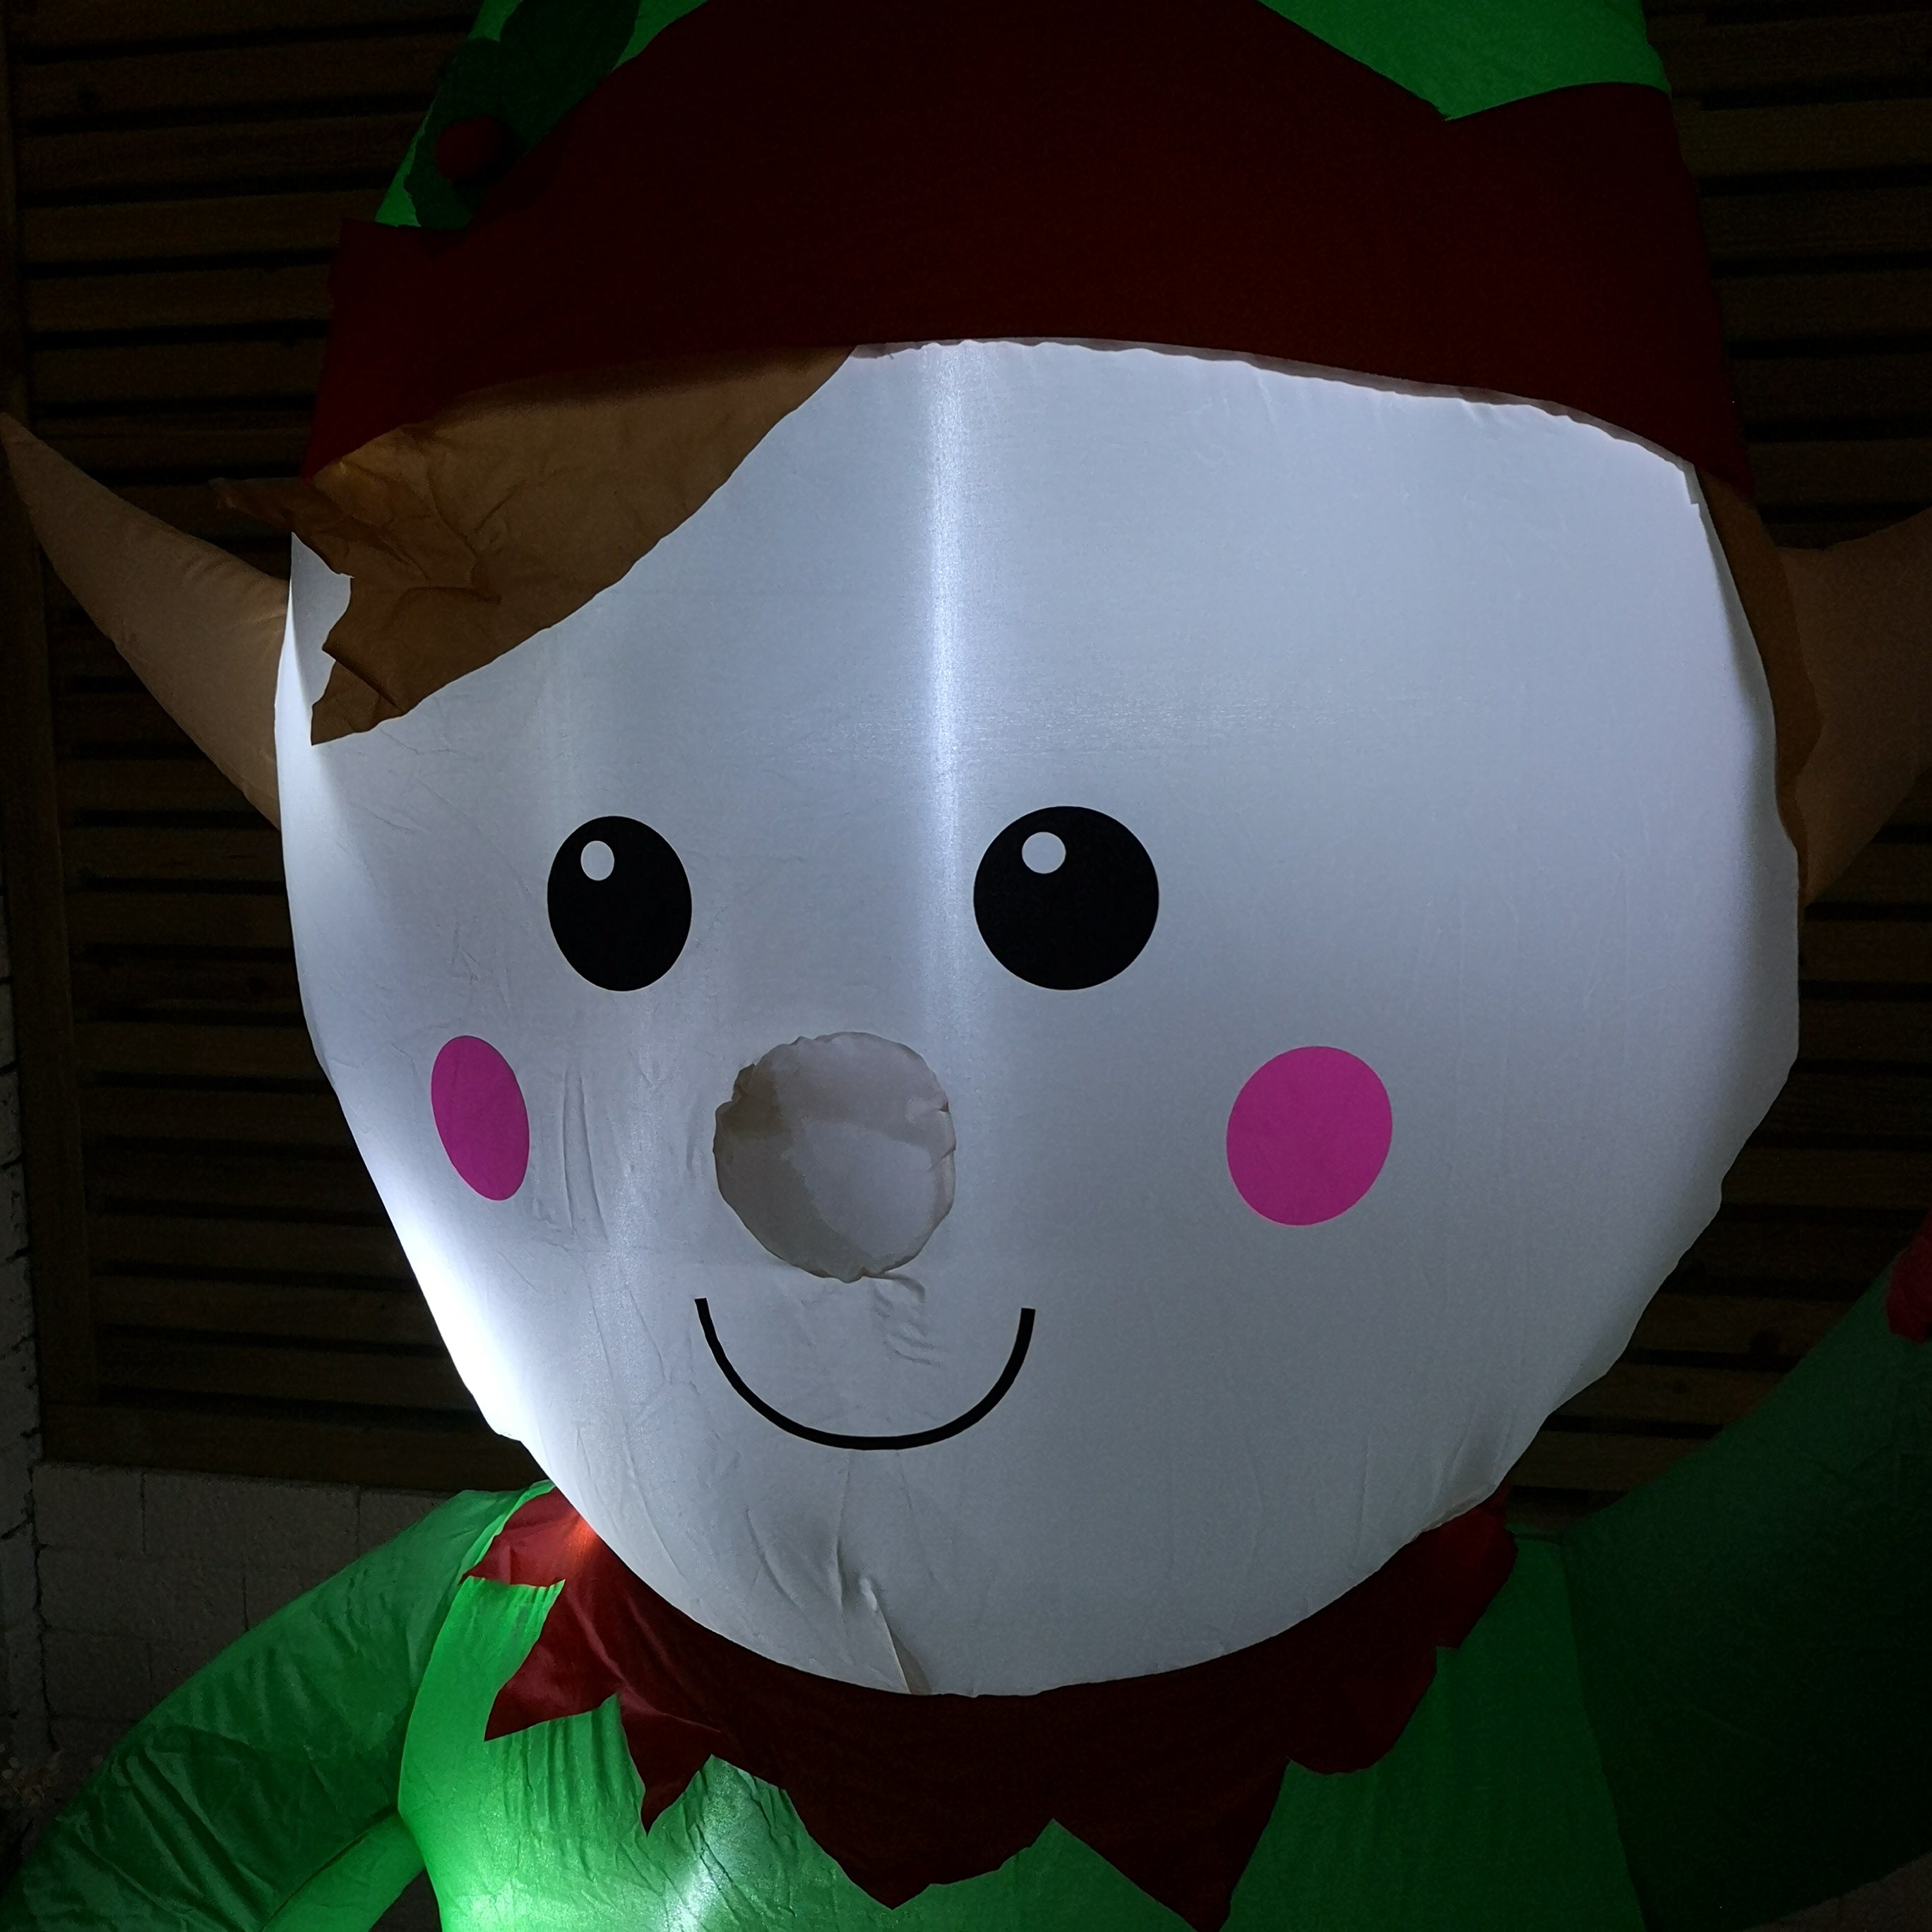 1.8m Inflatable Light up LED Indoor Outdoor Christmas Elf Decoration